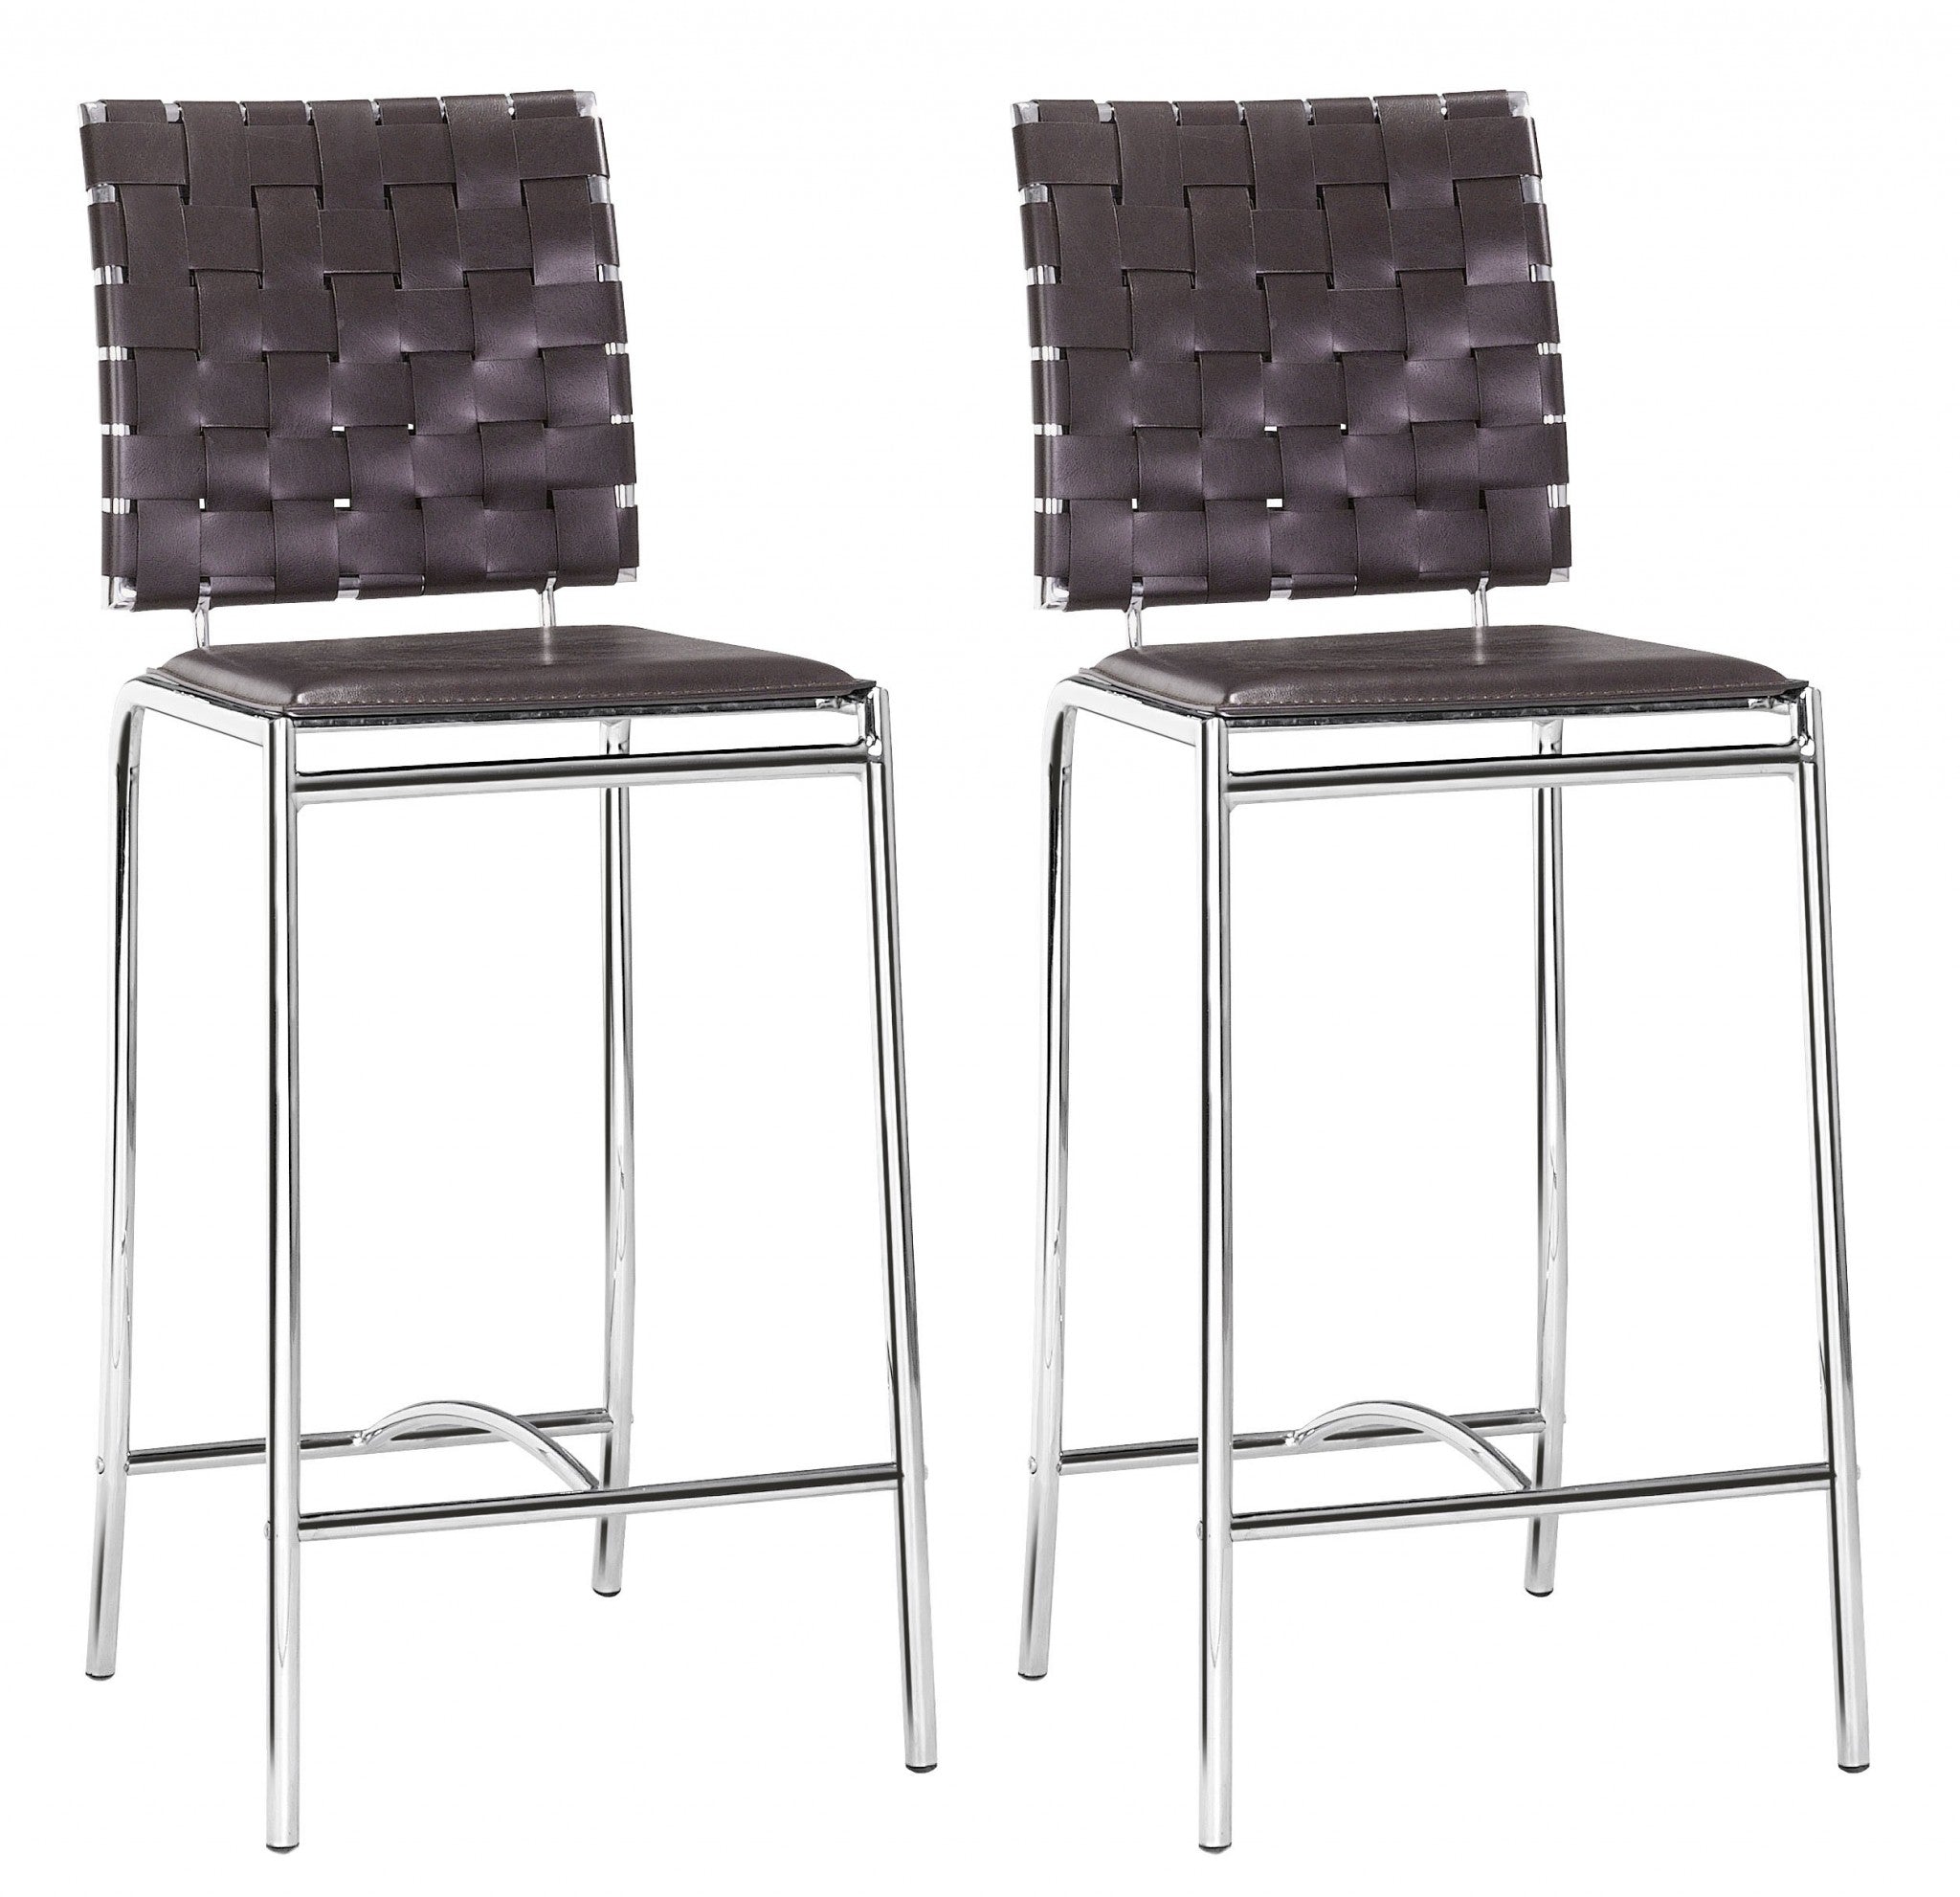 Set of Two 26" Espresso And Silver Steel Low Back Counter Height Bar Chairs